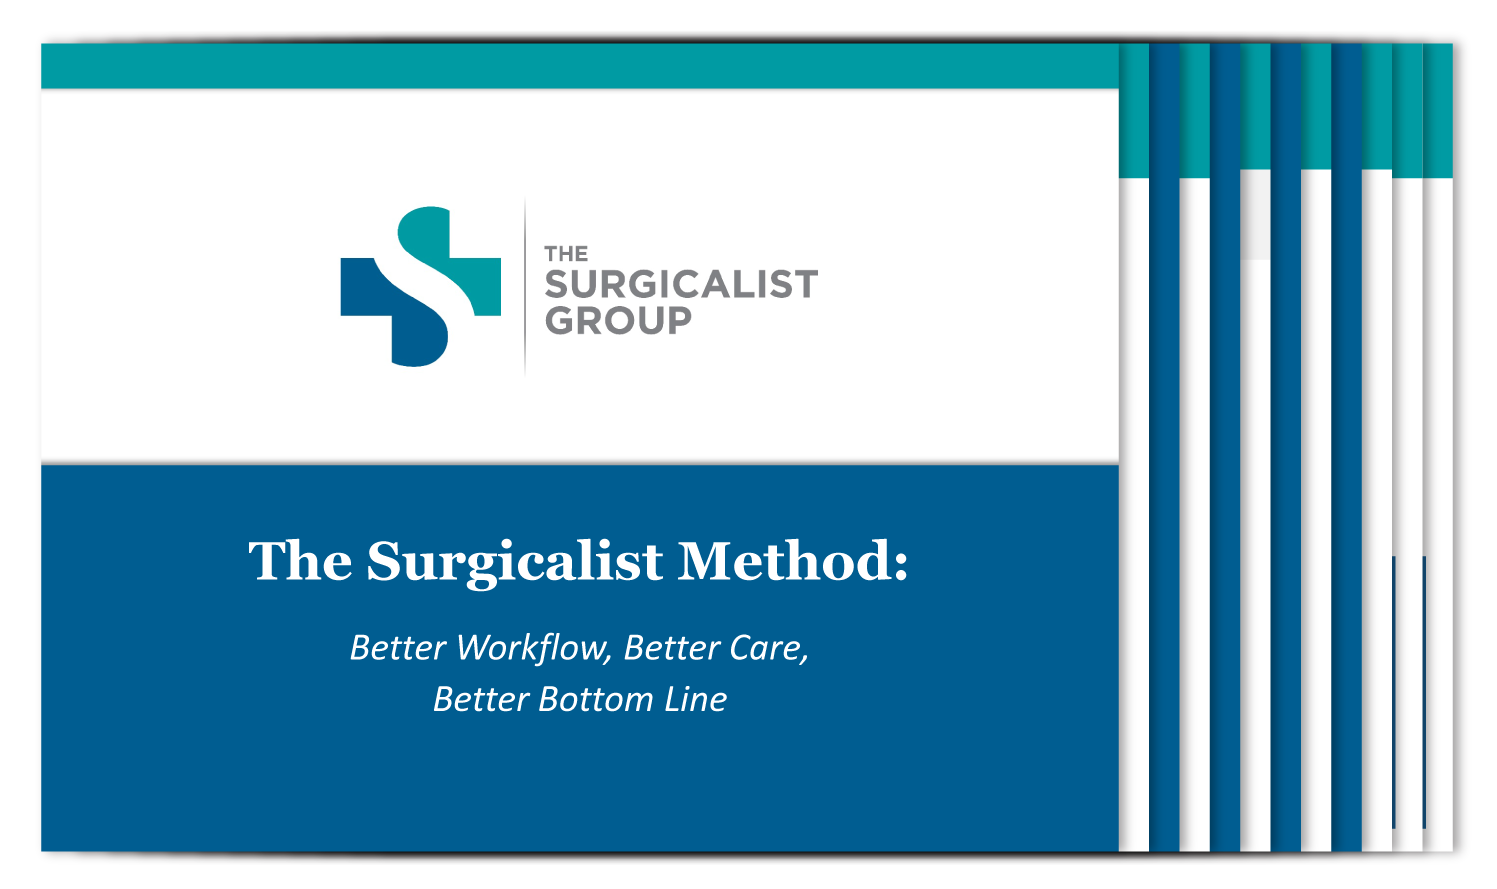 The Surgicalist Group Powerpoint